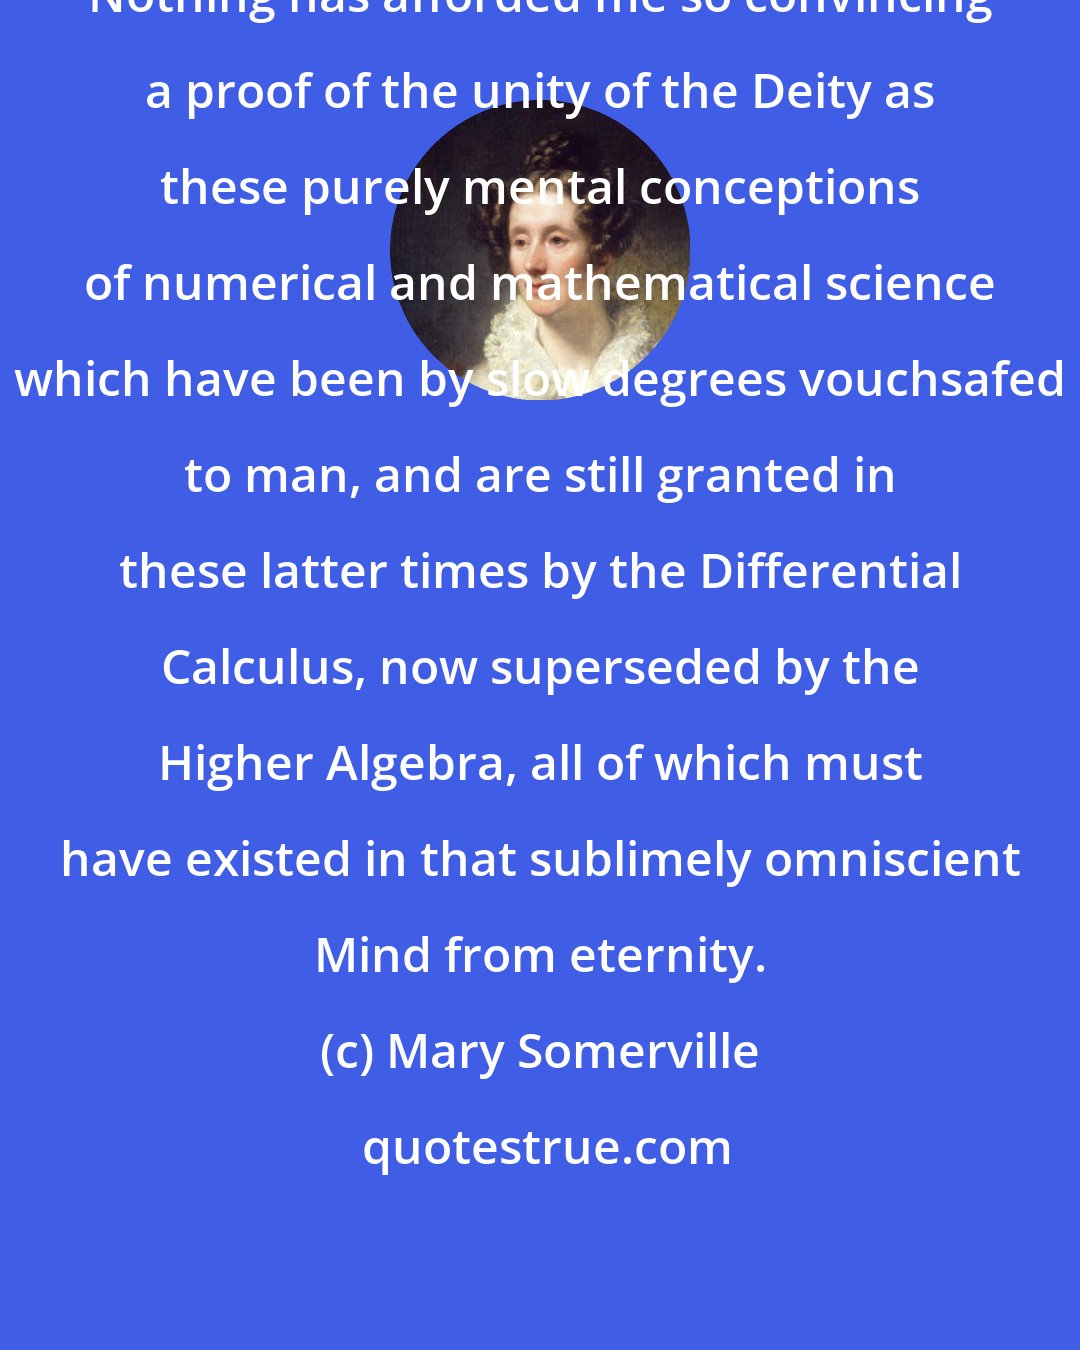 Mary Somerville: Nothing has afforded me so convincing a proof of the unity of the Deity as these purely mental conceptions of numerical and mathematical science which have been by slow degrees vouchsafed to man, and are still granted in these latter times by the Differential Calculus, now superseded by the Higher Algebra, all of which must have existed in that sublimely omniscient Mind from eternity.